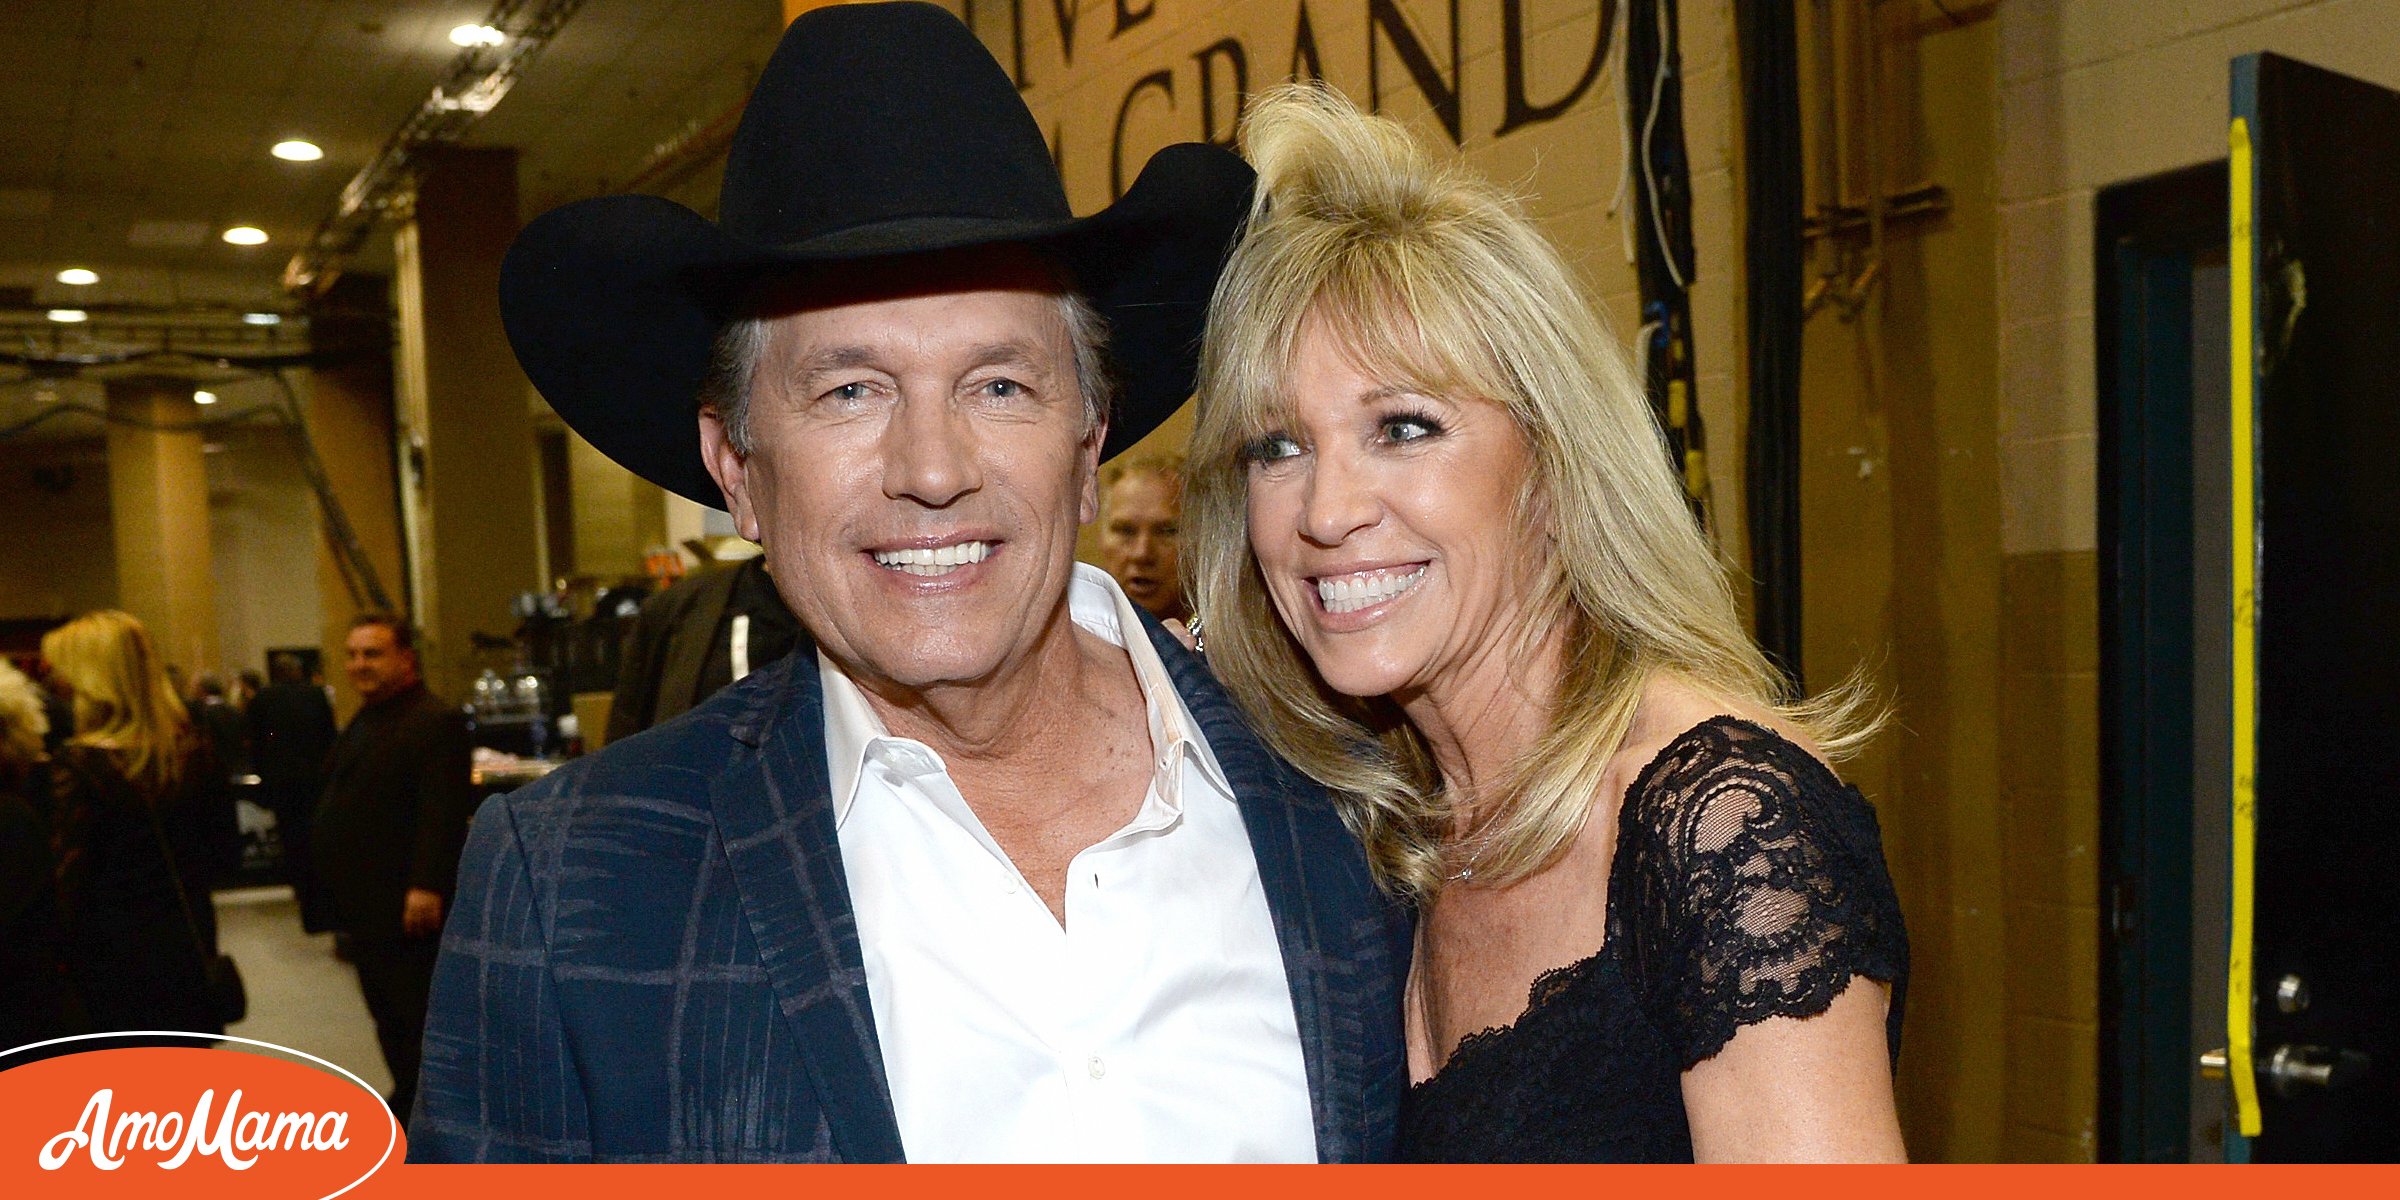 Who Is Strait Married To? Meet Norma, the Singer's Beloved Wife